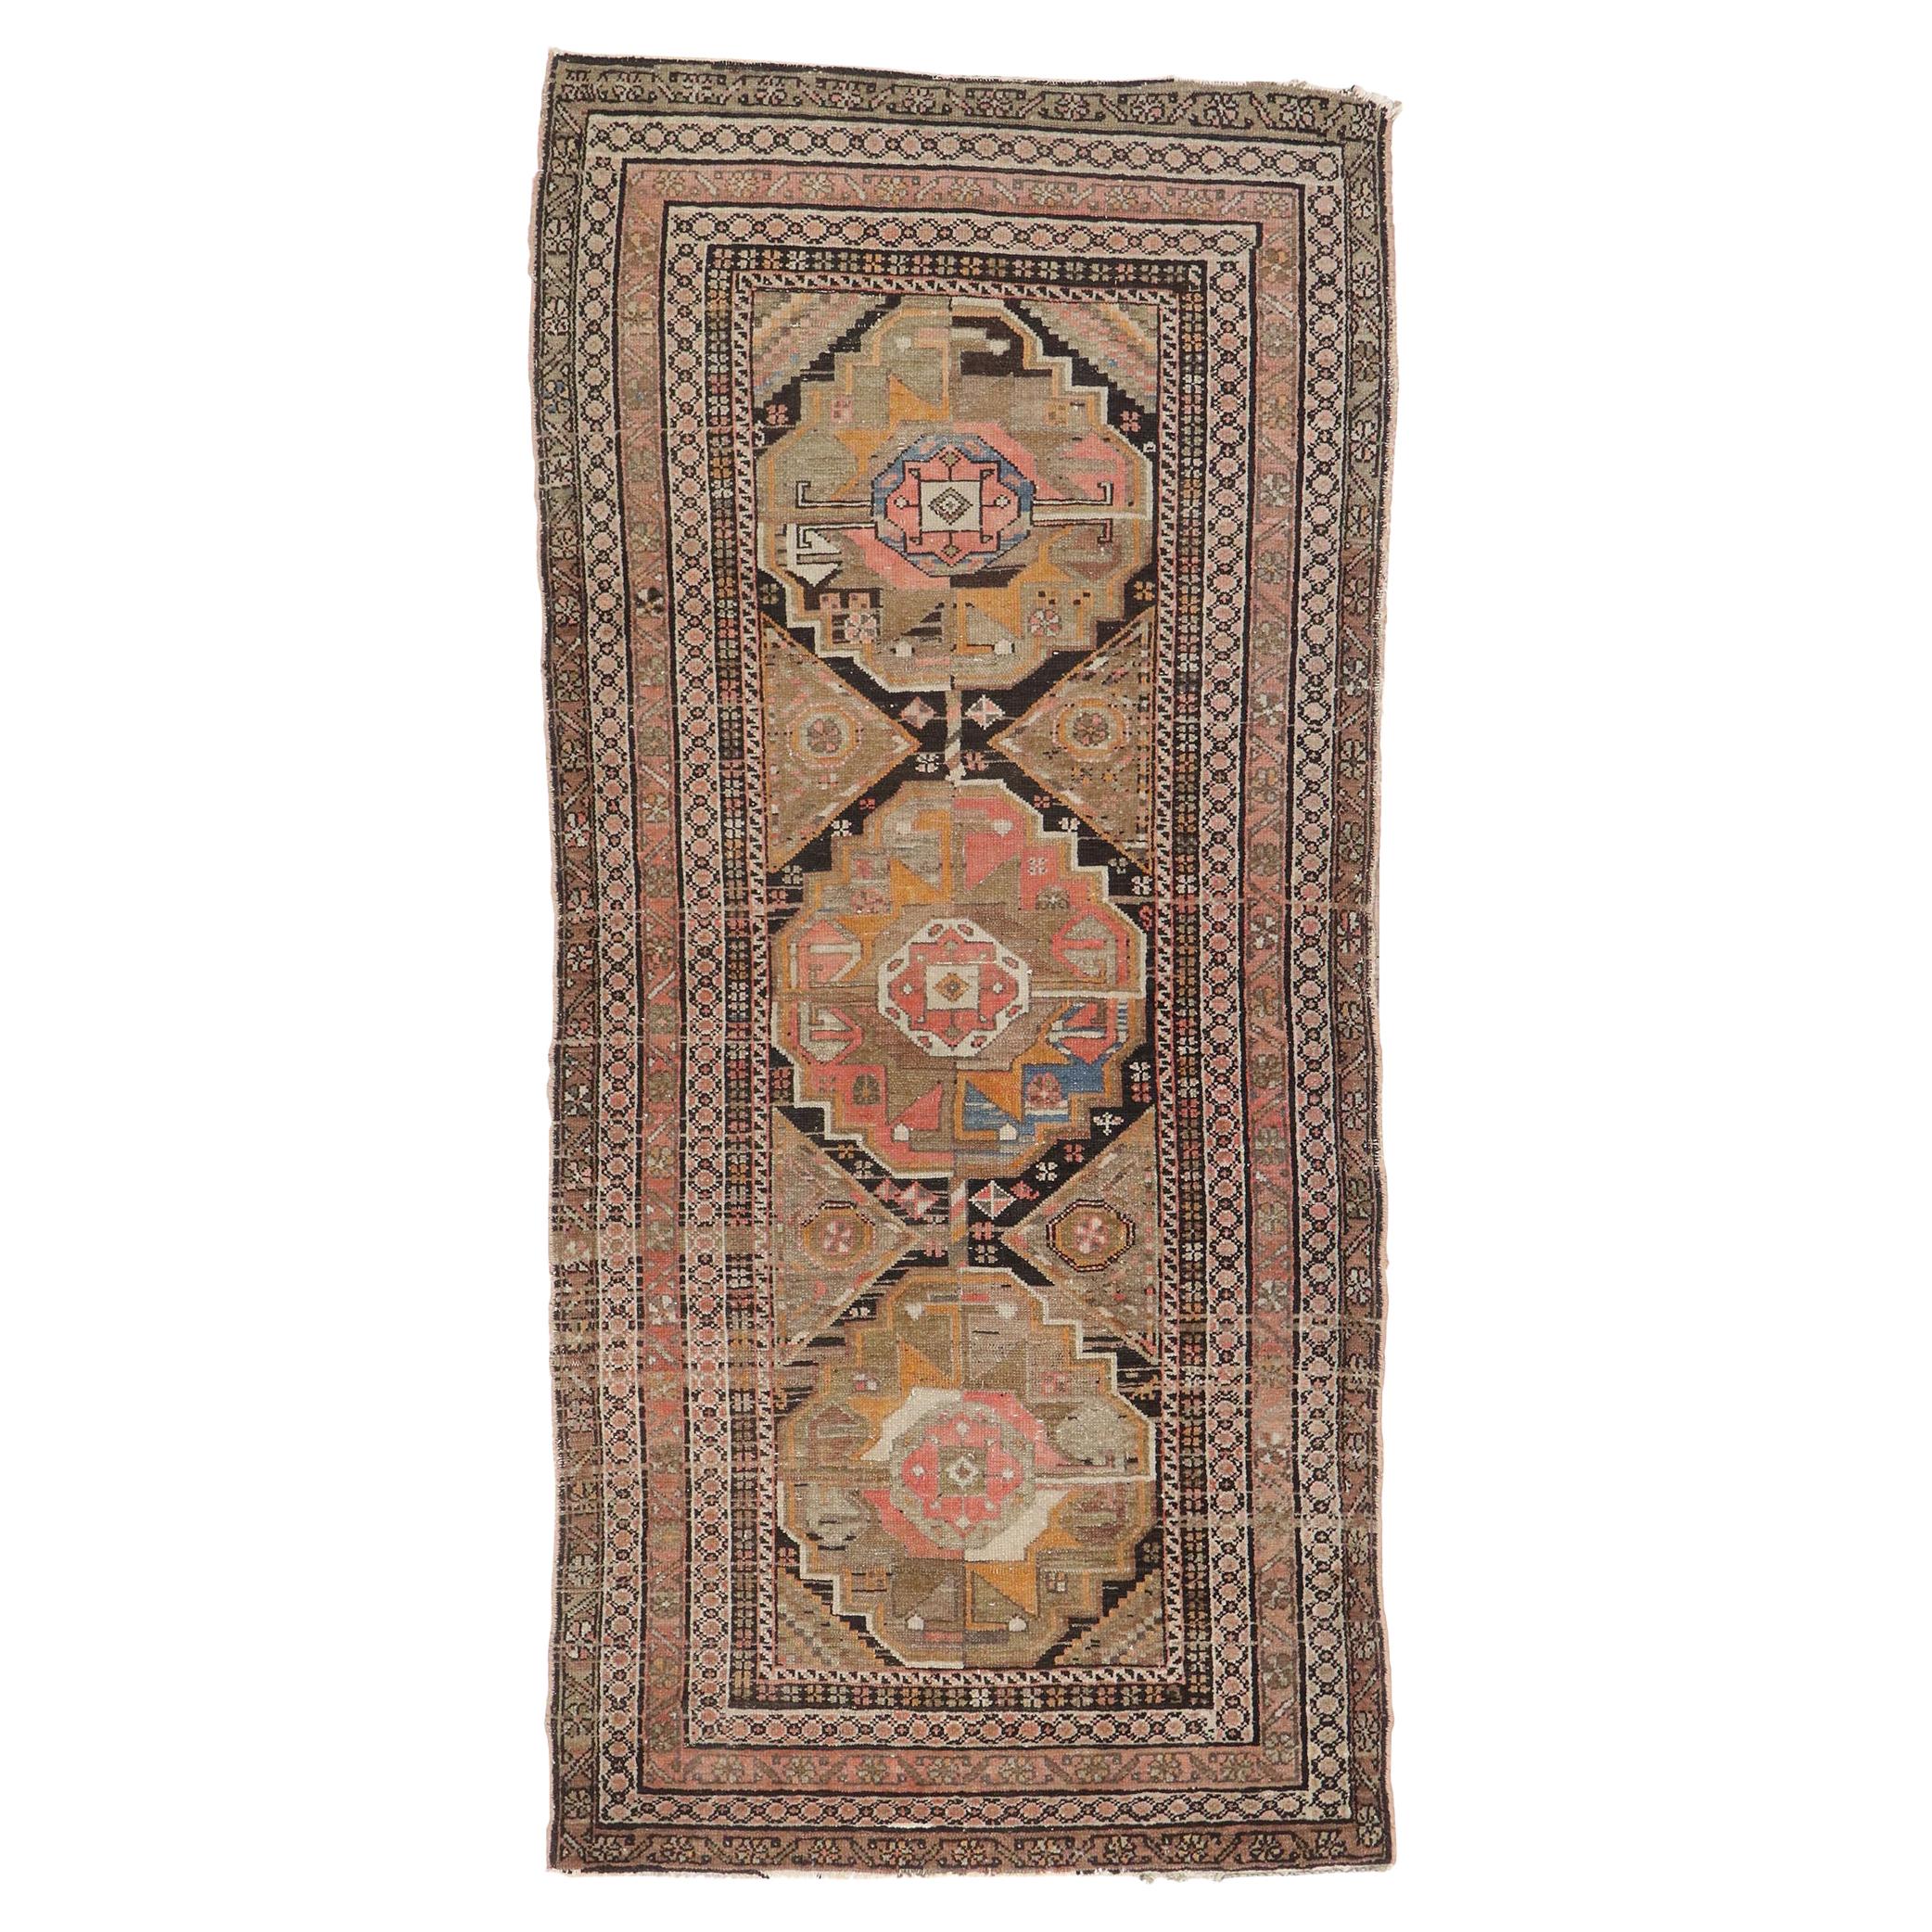 Antique Persian Malayer Rug with Mid-Century Modern Bohemian Style